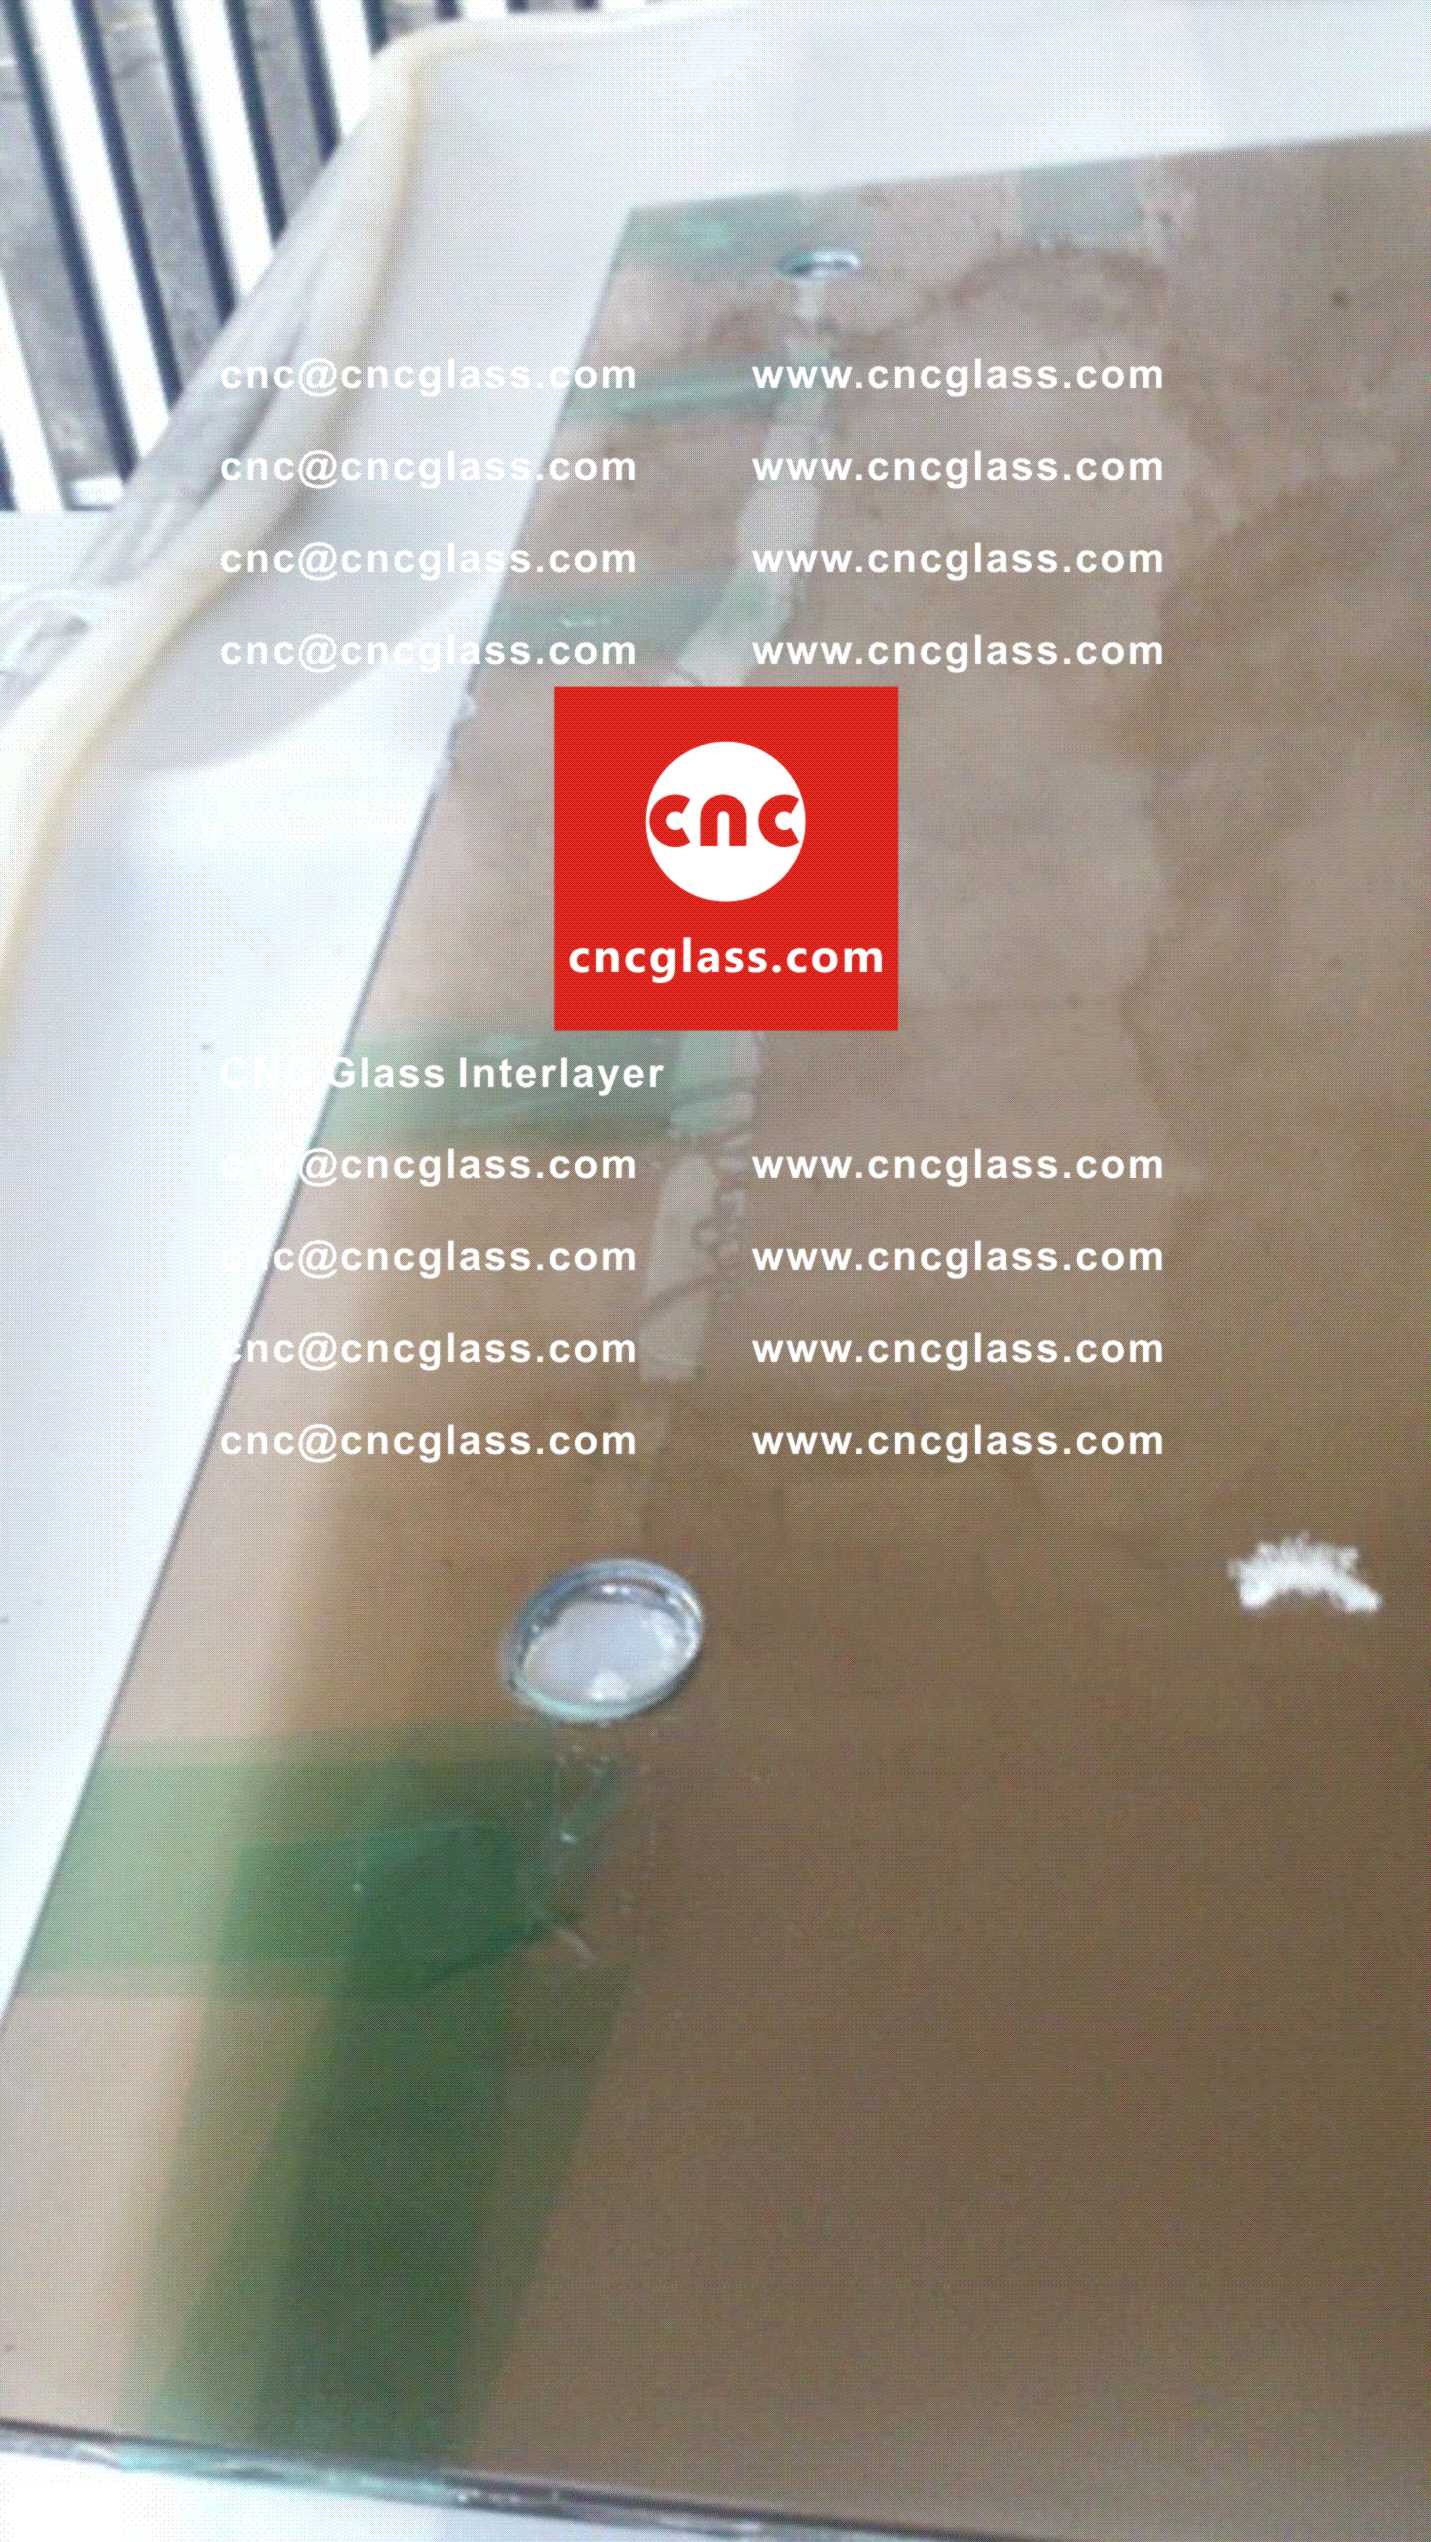 Too High Temperature Causing Bubbles in EVA Film Safety Laminated Glass Glazing (Practical Case Study) (1)